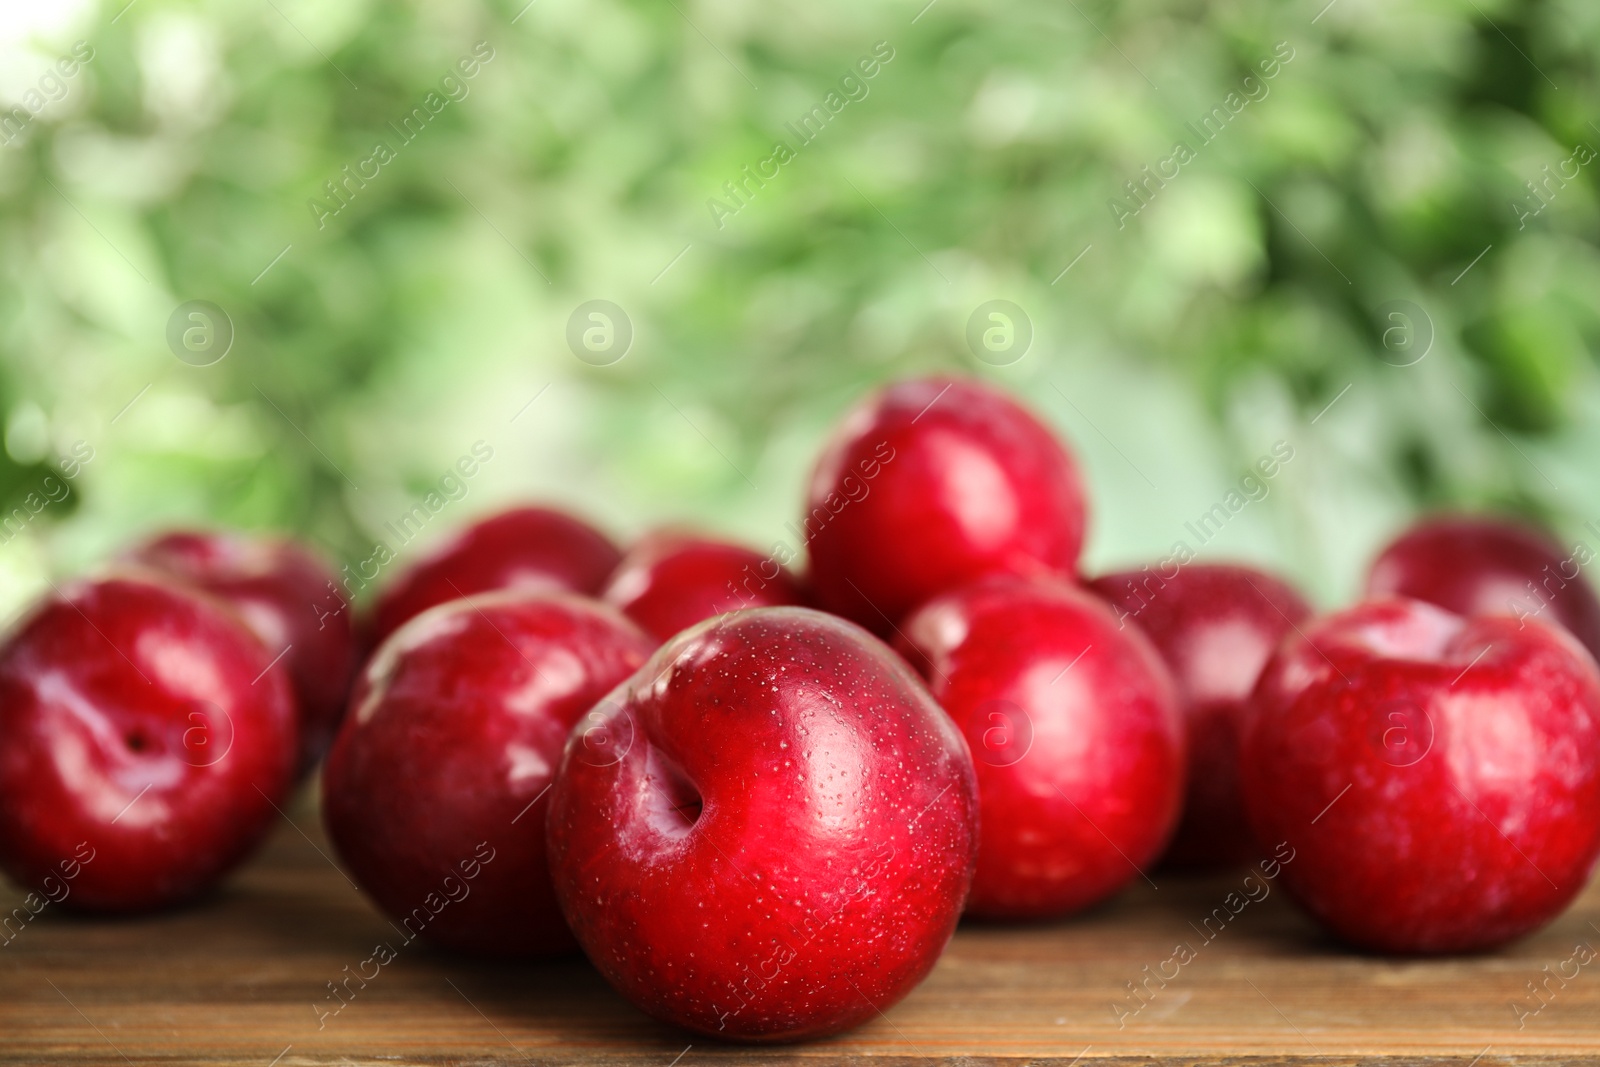 Photo of Delicious ripe plums on wooden table against blurred background, closeup. Space for text